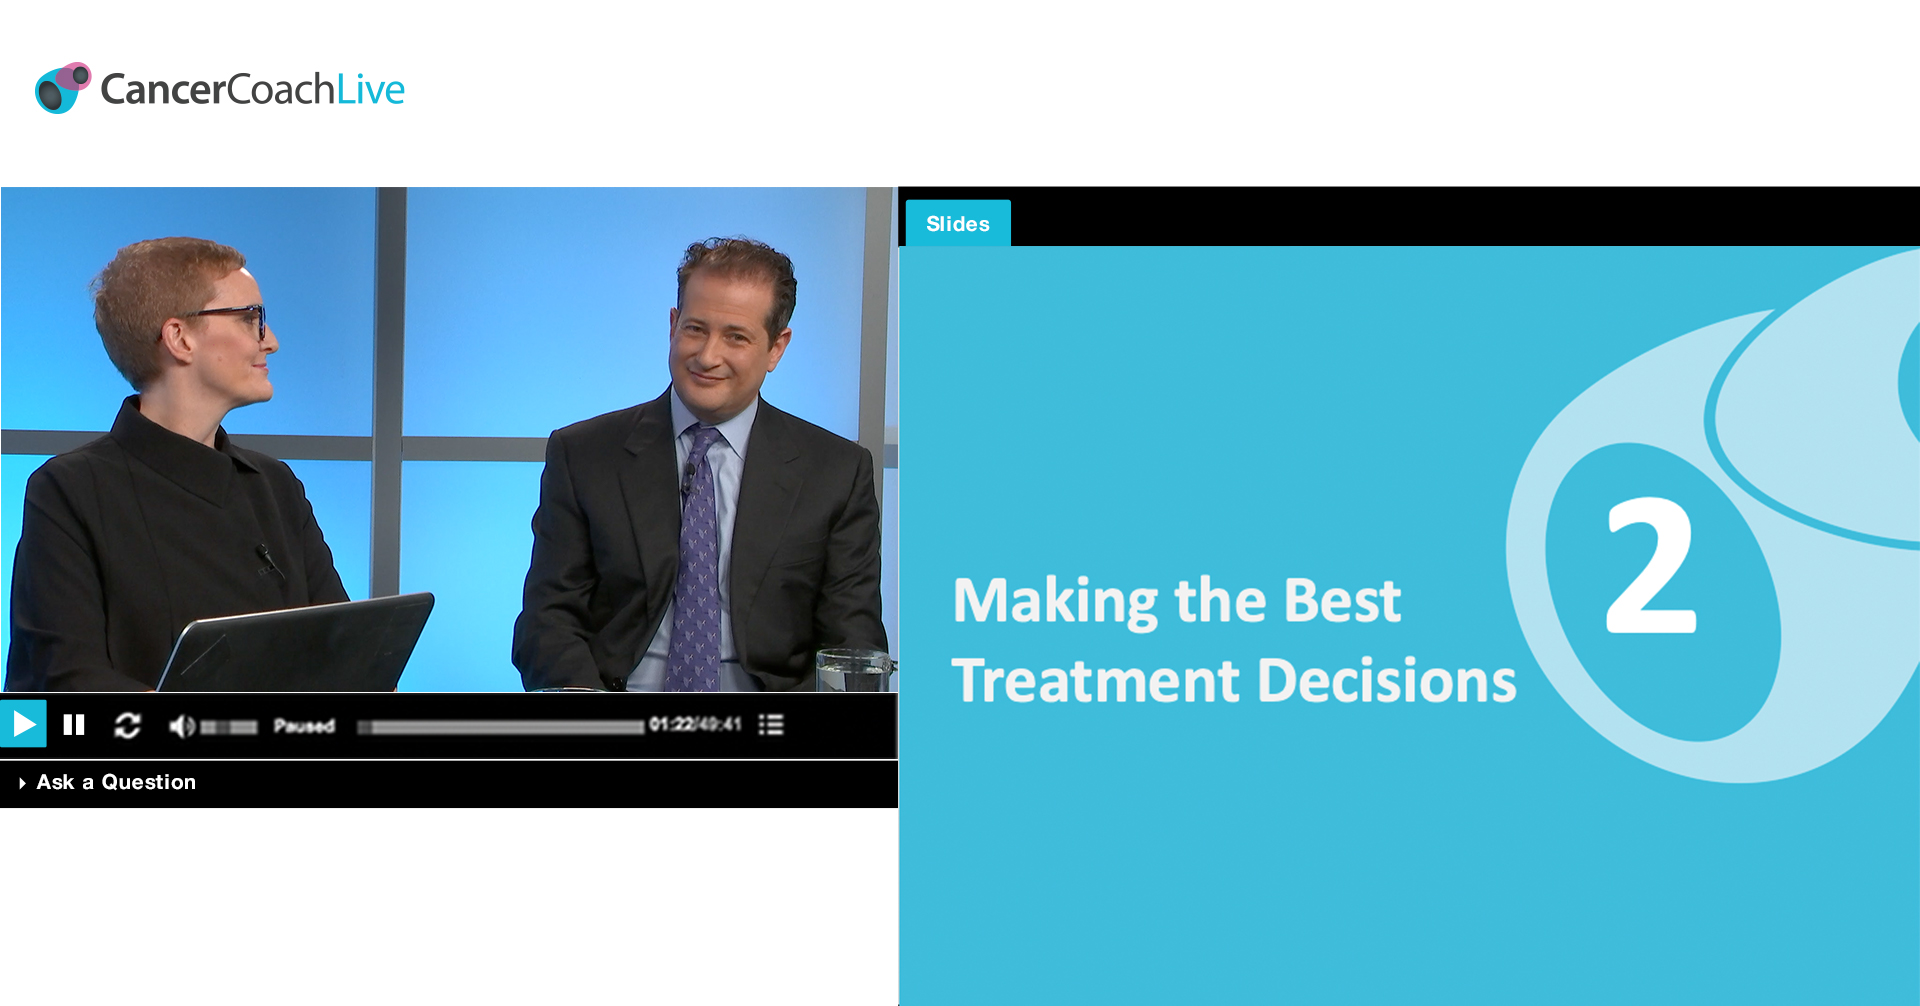 Chapter 2: Making the Best Treatment Decisions